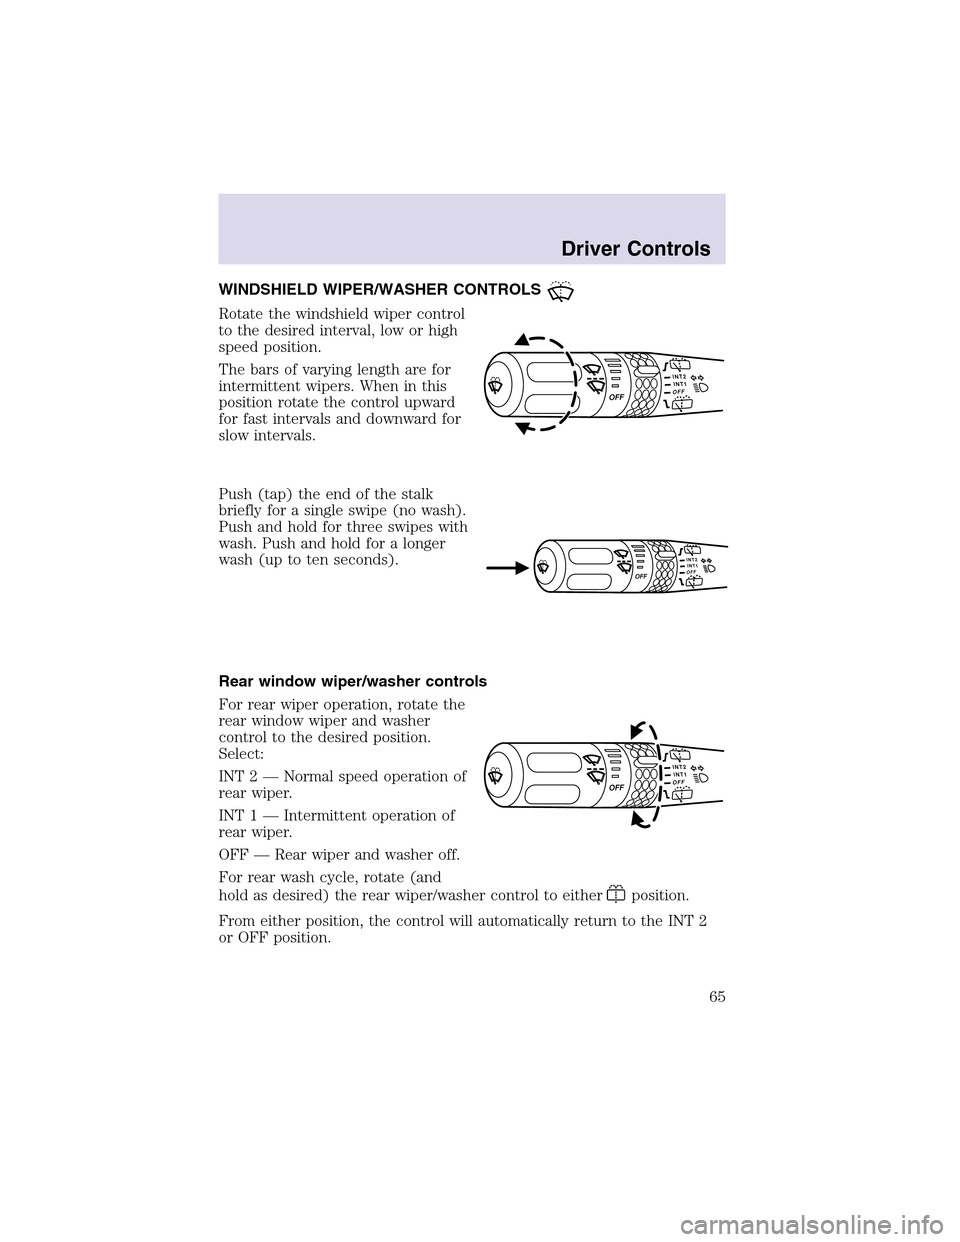 LINCOLN AVIATOR 2003 Repair Manual WINDSHIELD WIPER/WASHER CONTROLS
Rotate the windshield wiper control
to the desired interval, low or high
speed position.
The bars of varying length are for
intermittent wipers. When in this
position 